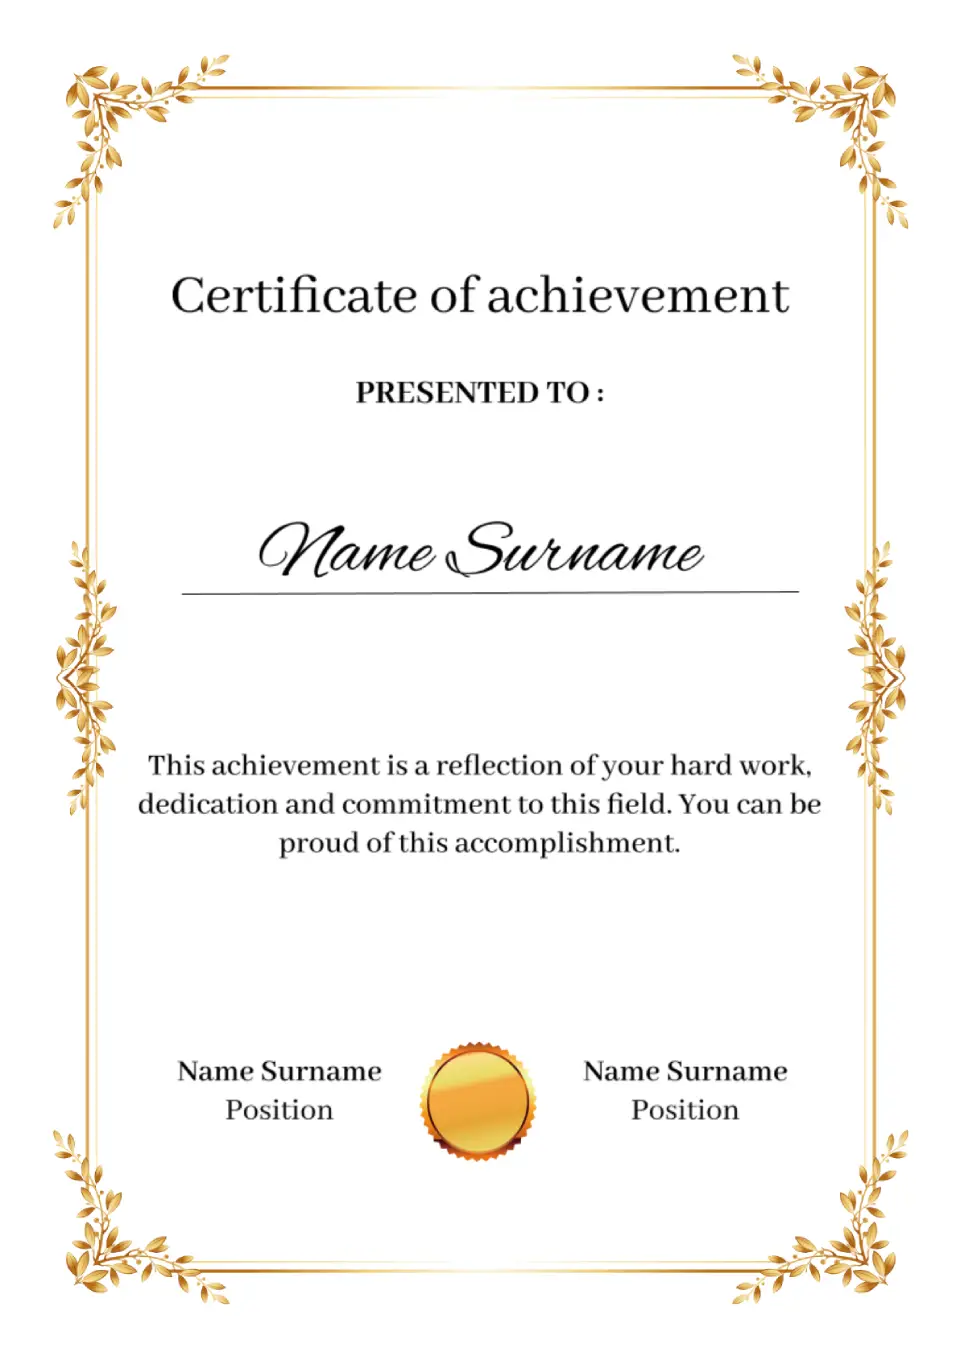 Template for Certificate of achievement for Google Docs